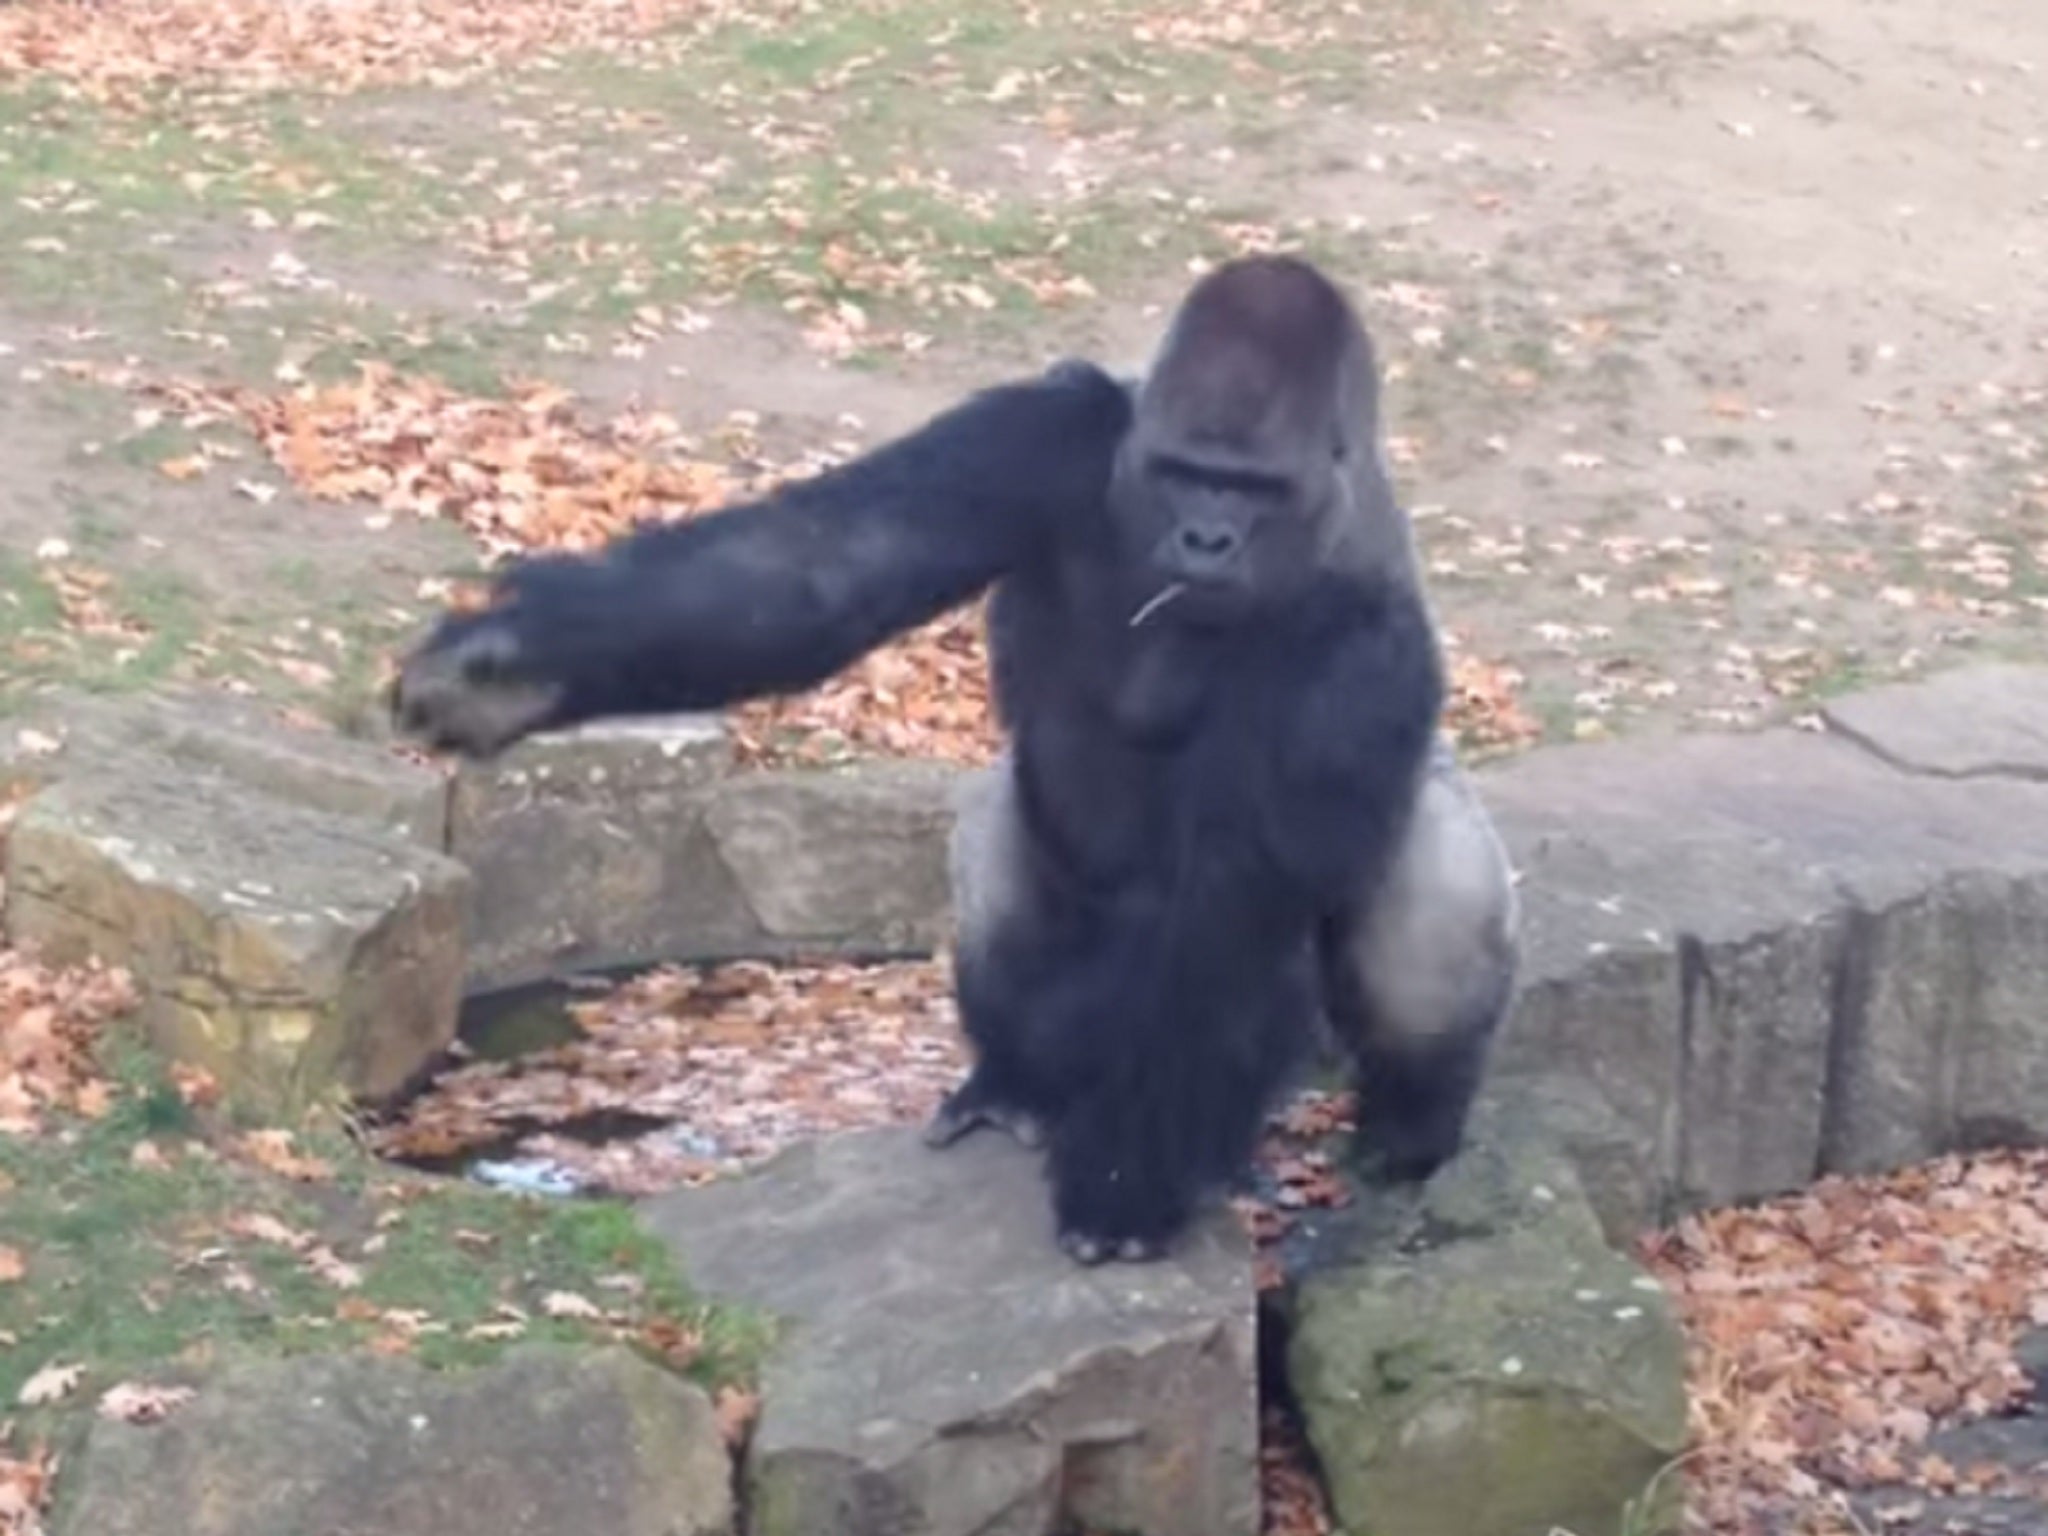 The angry gorilla lobbed a rock at a man filming it in Berlin Zoo